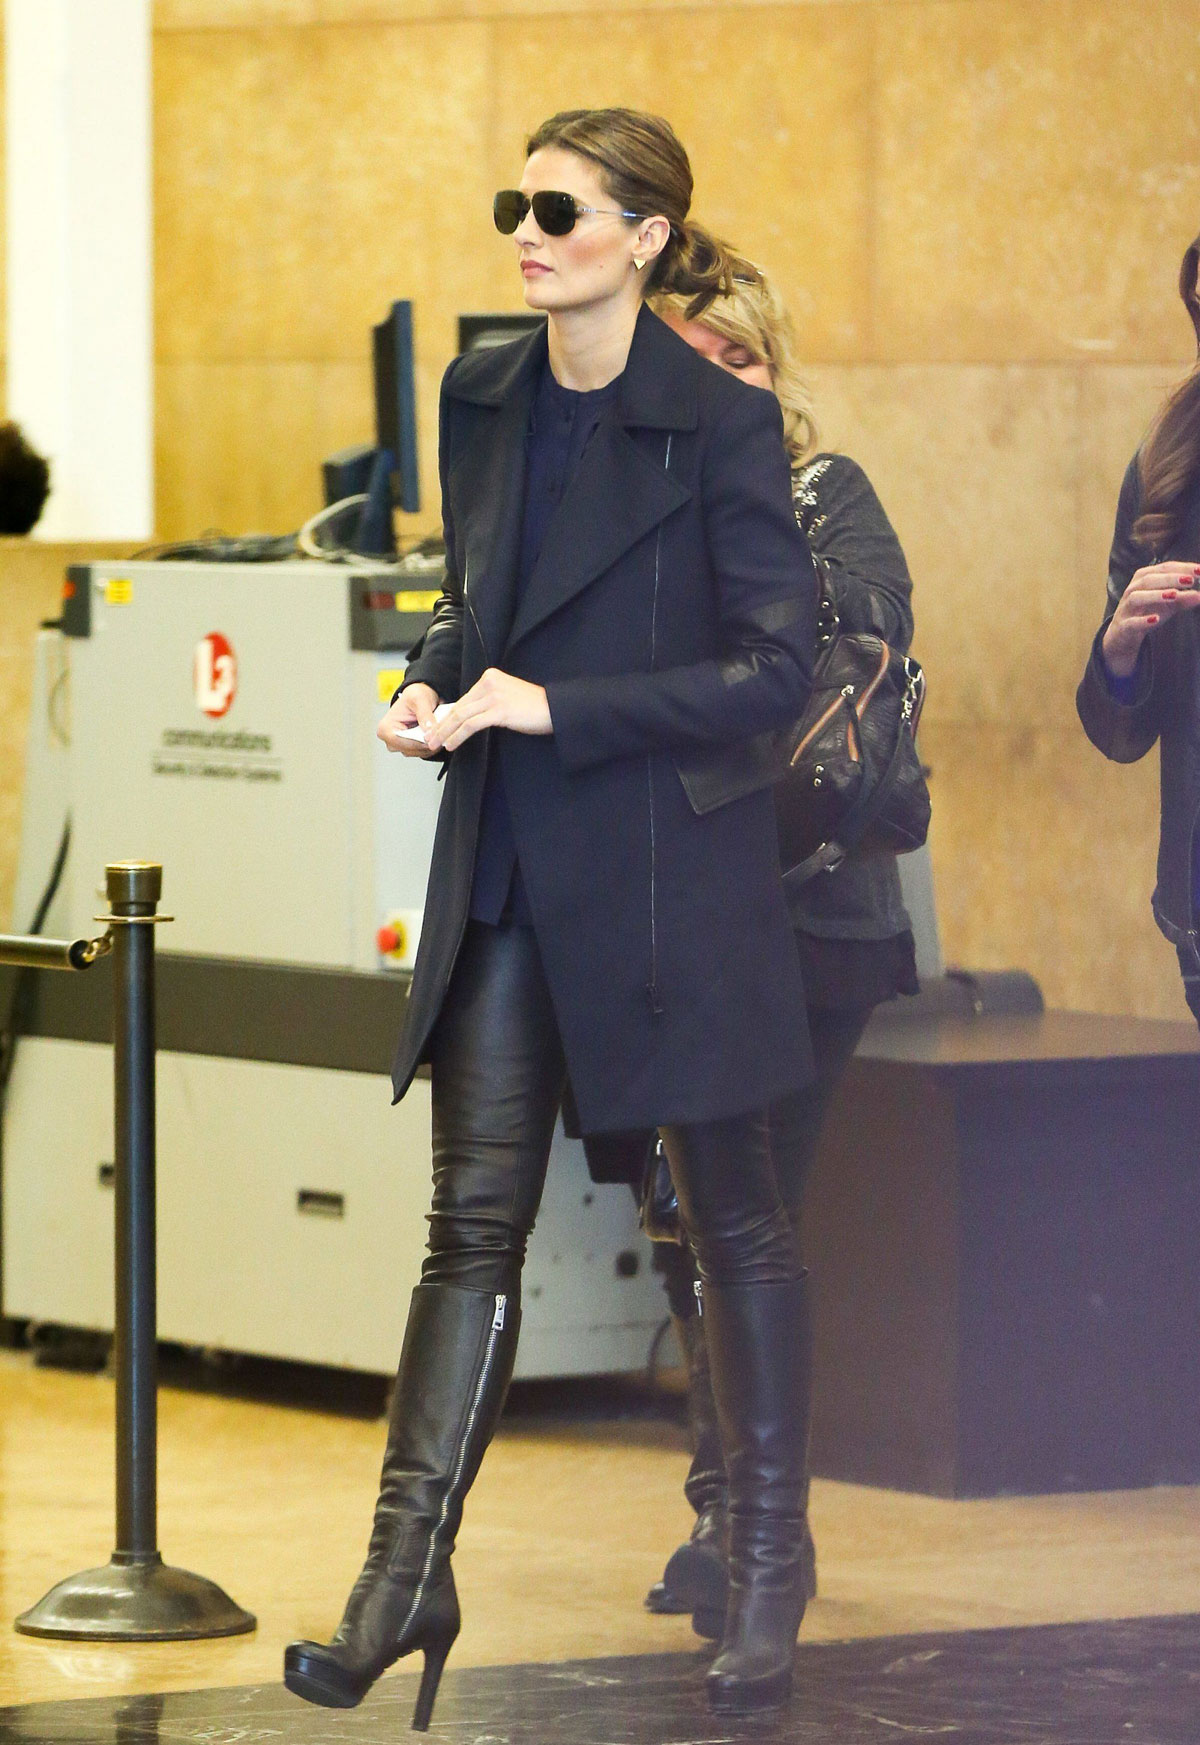 Stana Katic was spotted in New York